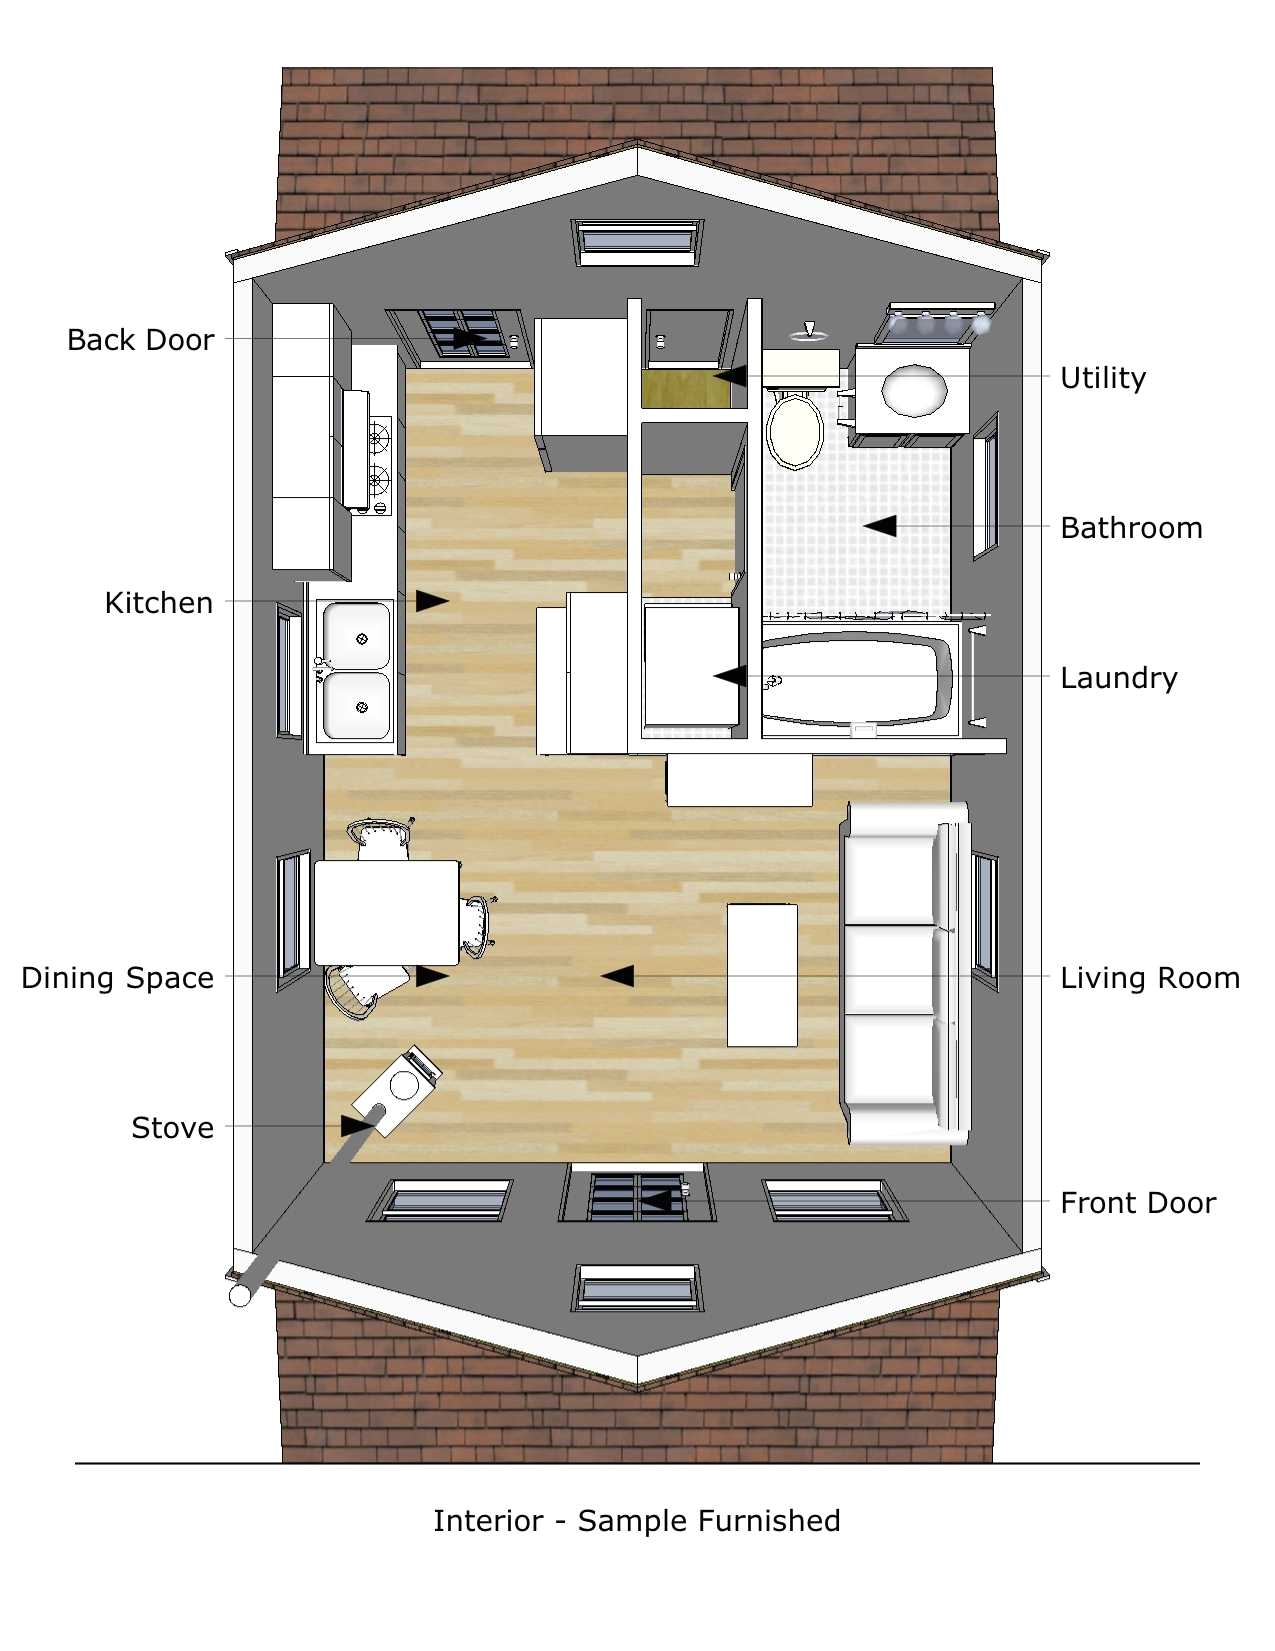 1 bedroom log cabin floor plans simple cabin house plans or tiny house plans 16x20 homes